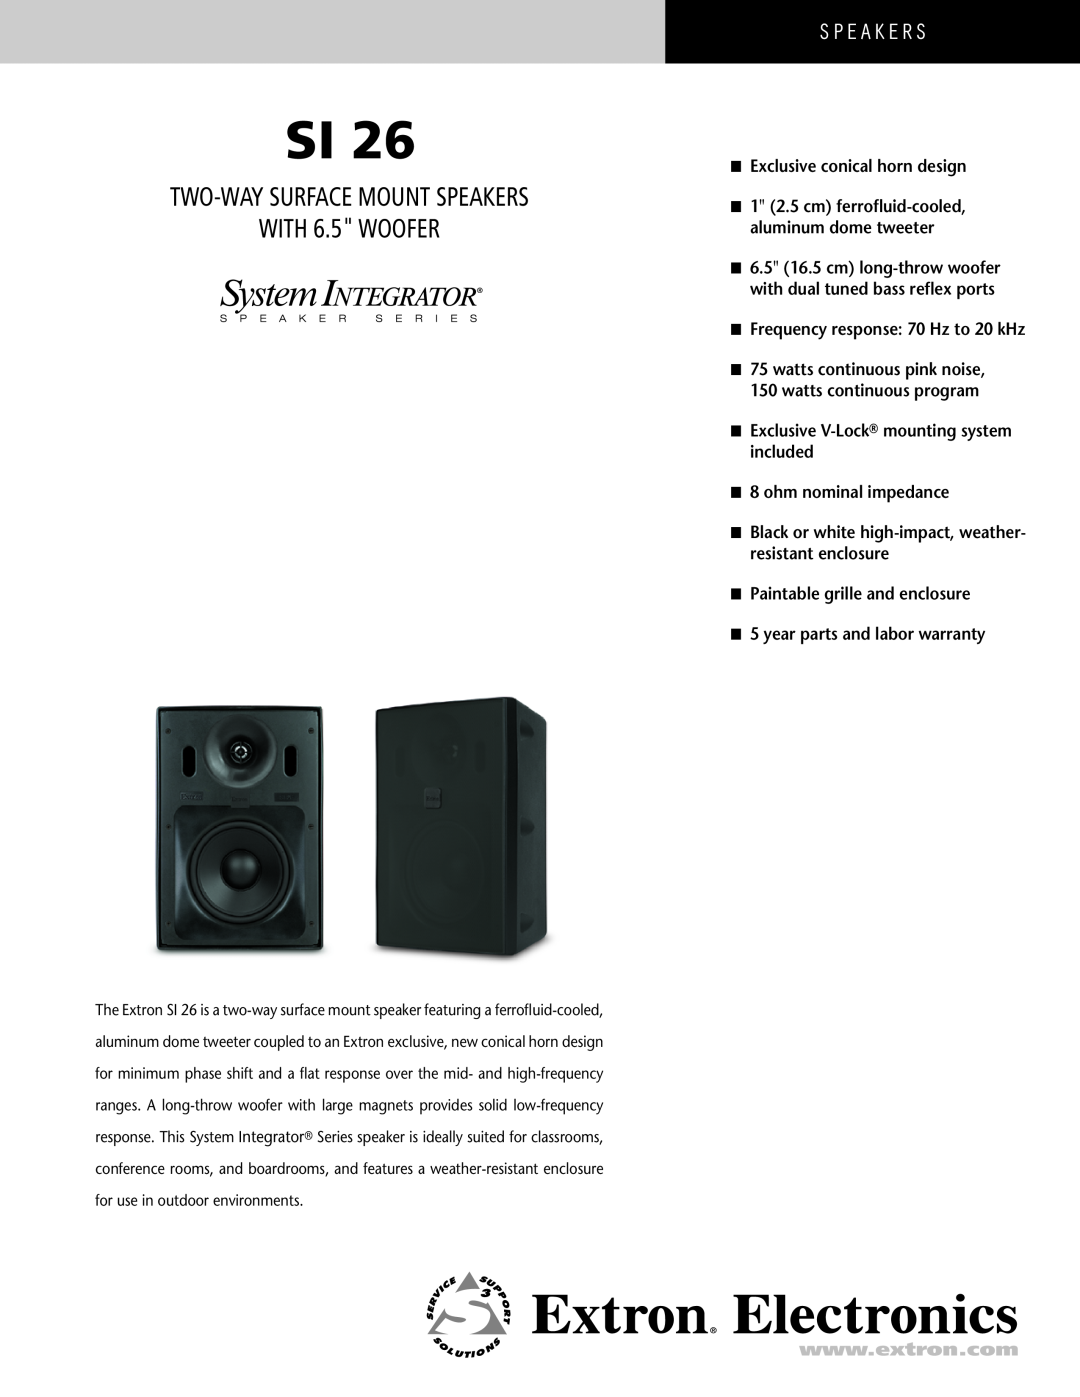 Extron electronic user manual Surface Mount Speakers, SI 26 and SI, Draft Copy, 68-1164-01, Rev. Ax1 